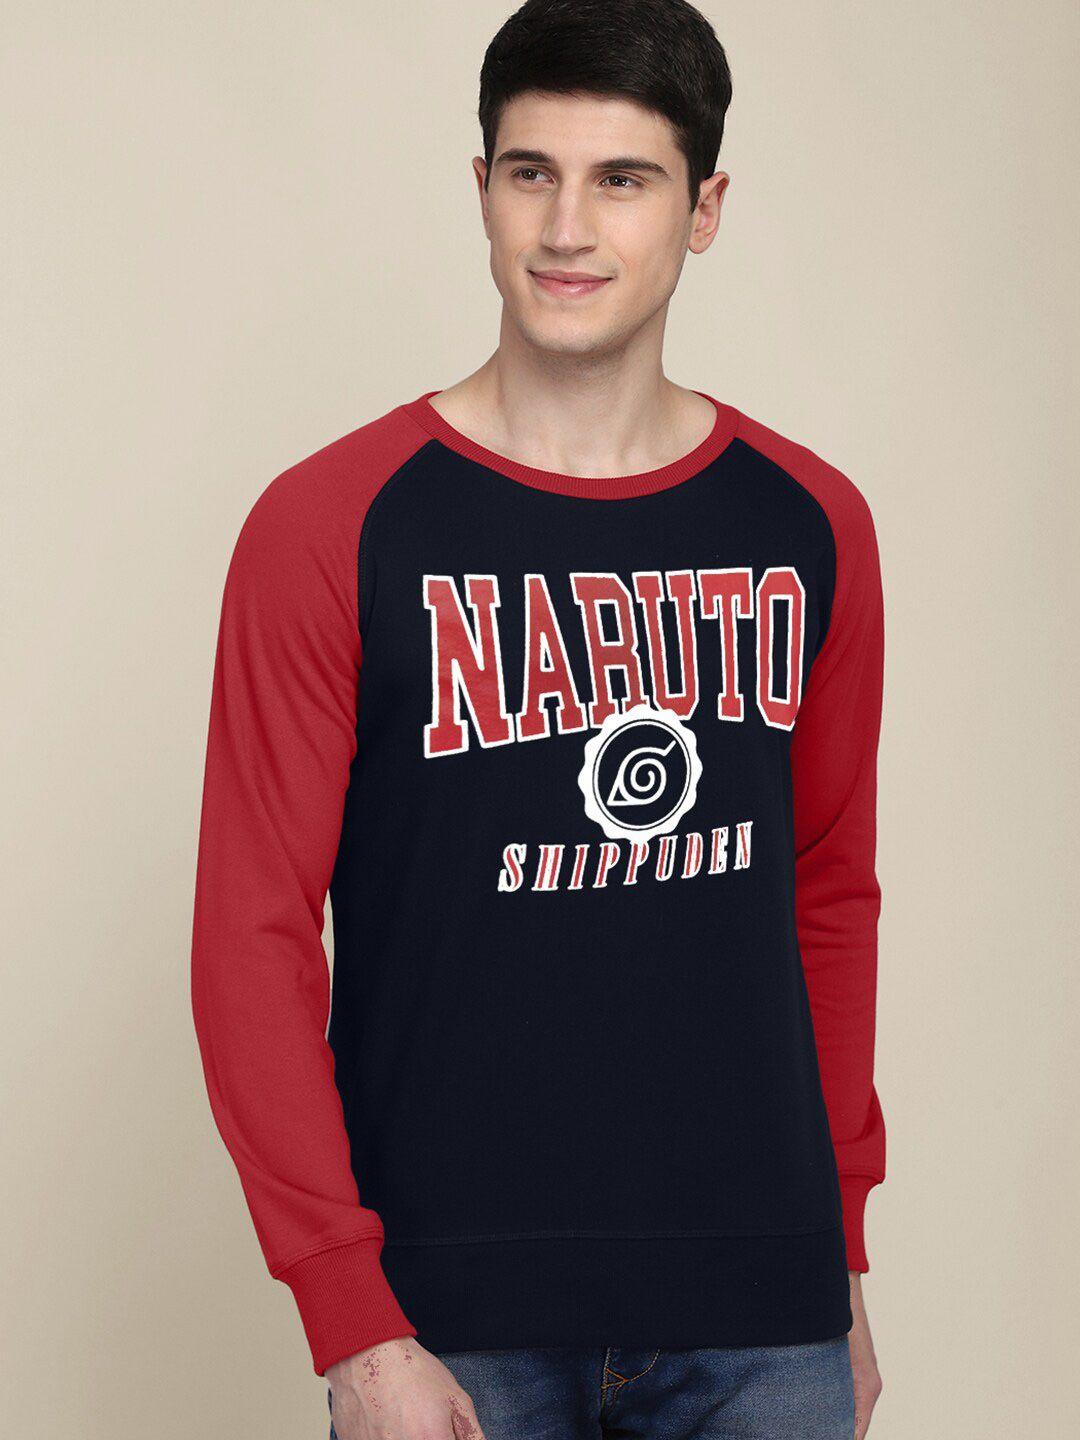 free-authority-naruto-typography-printed-cotton-pullover